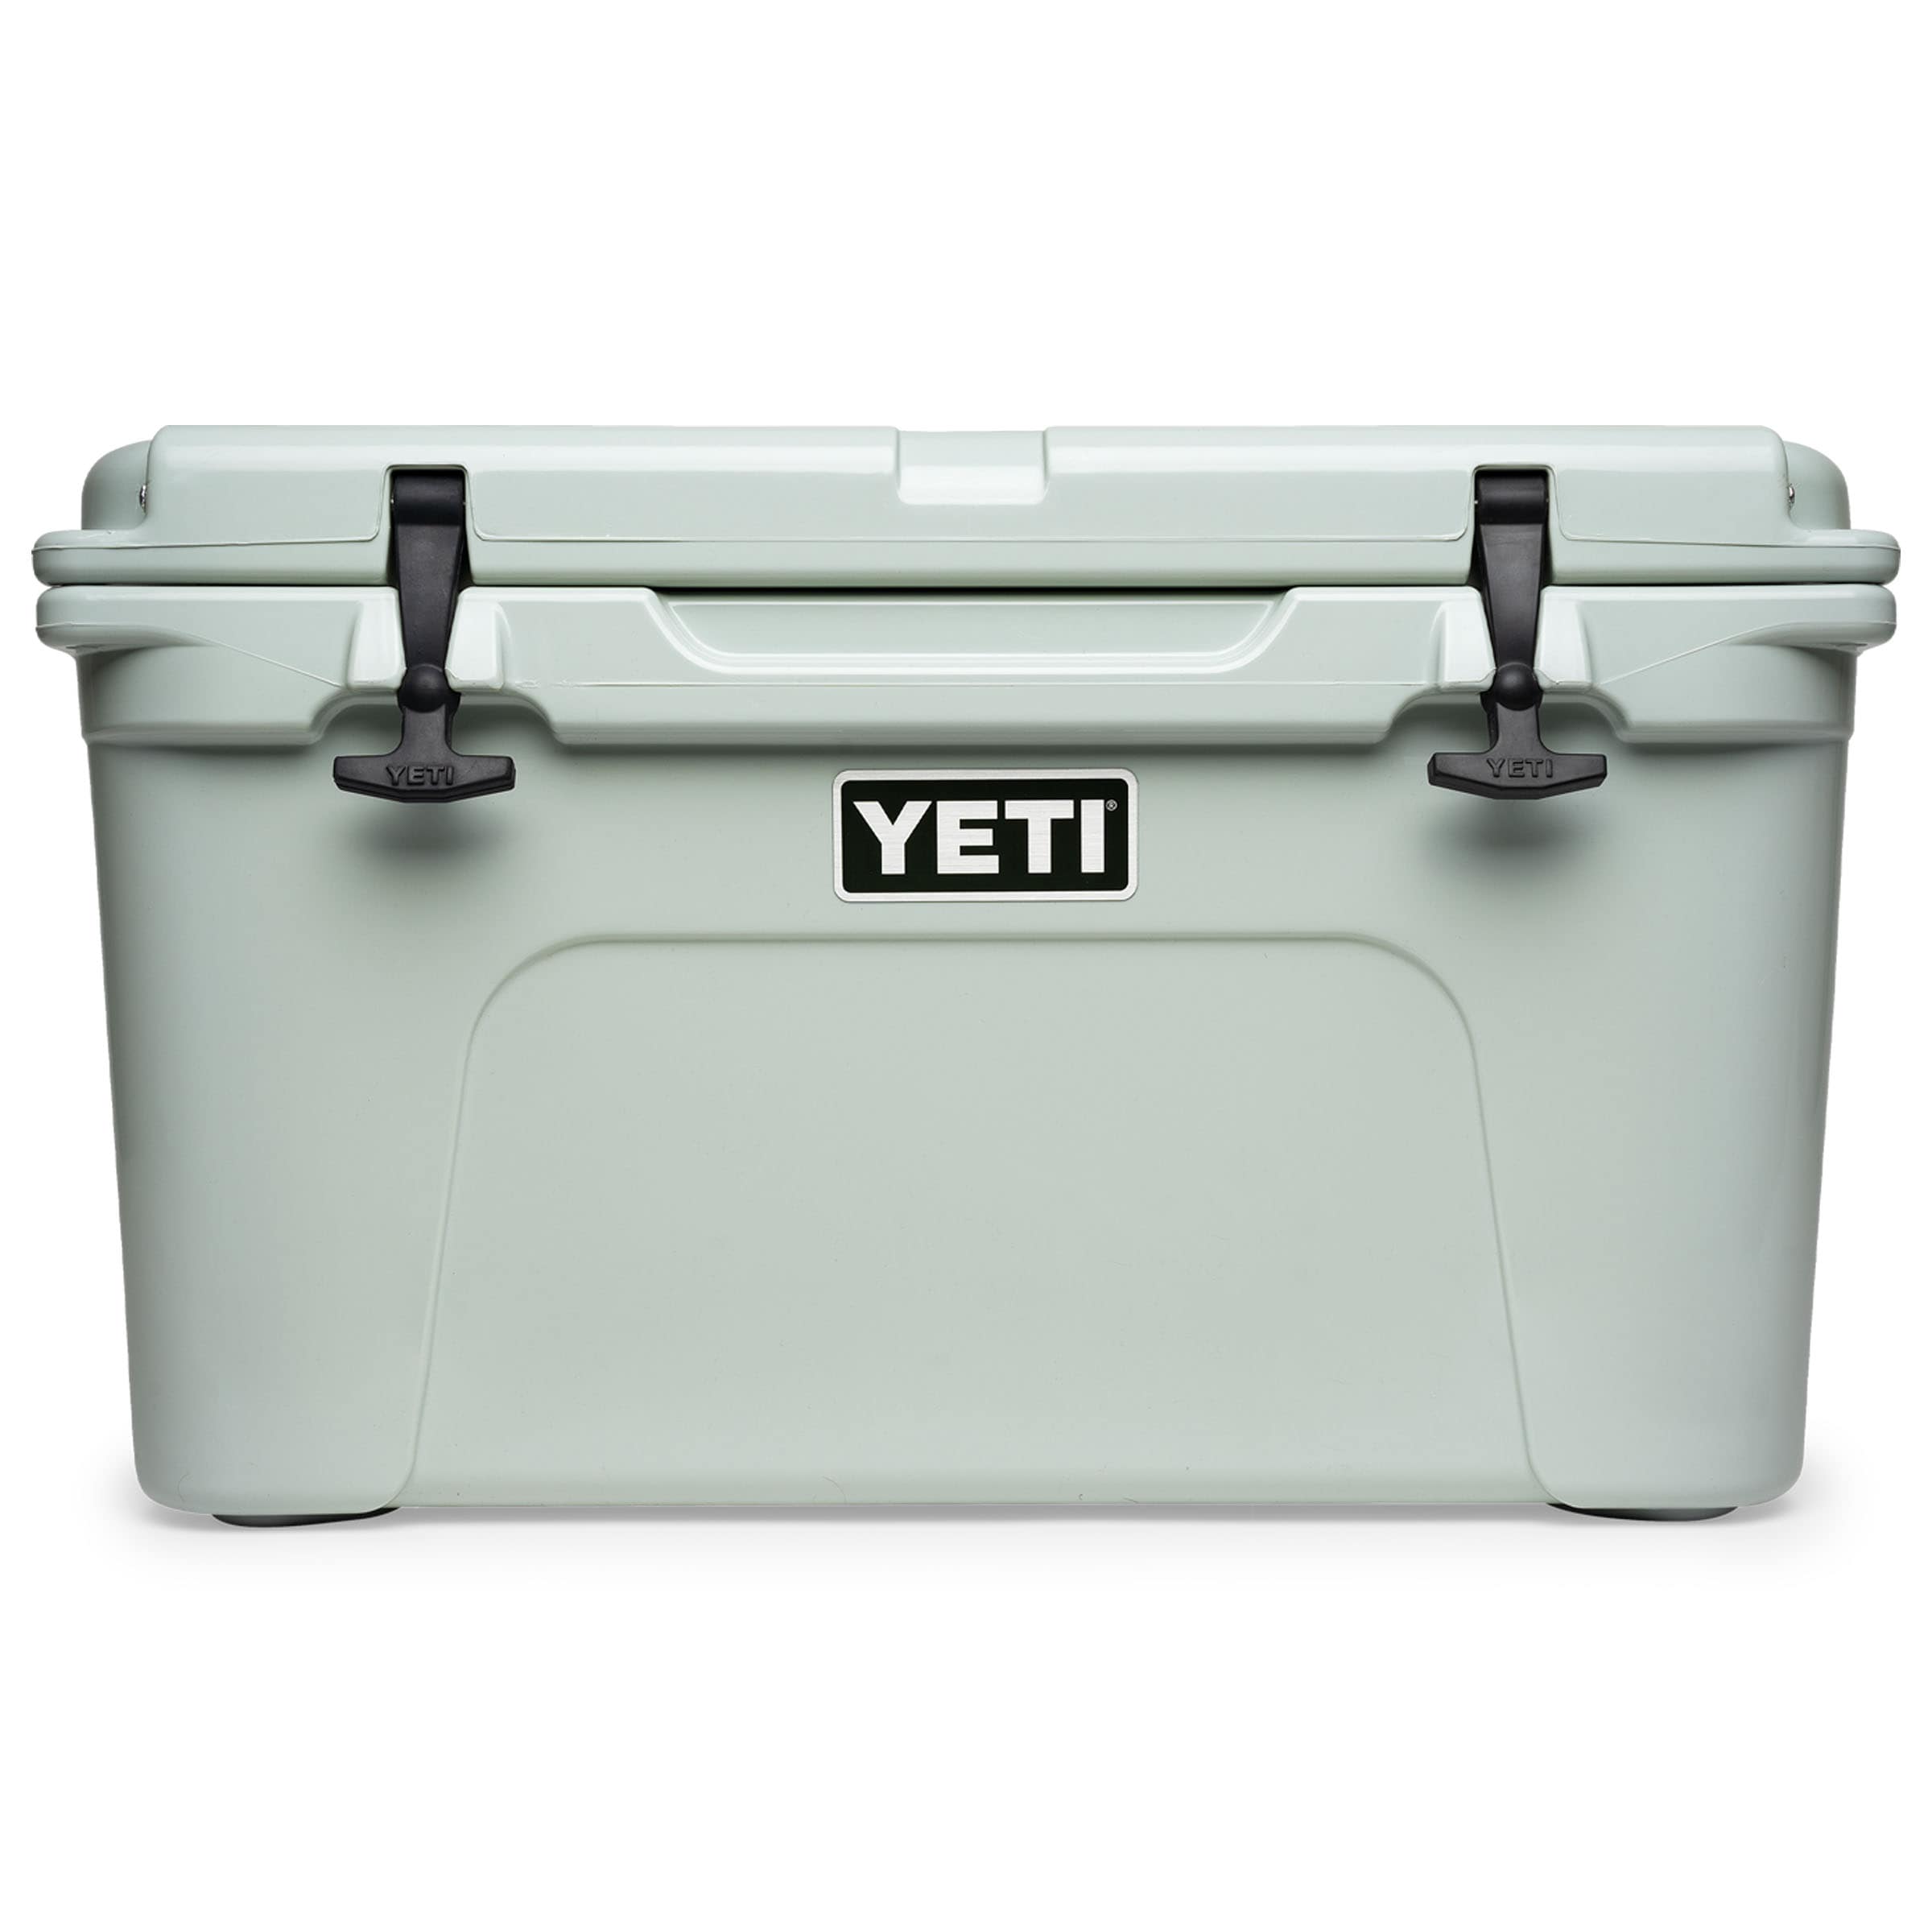 Yeti Tundra 45 Cooler Review - Pro Tool Reviews